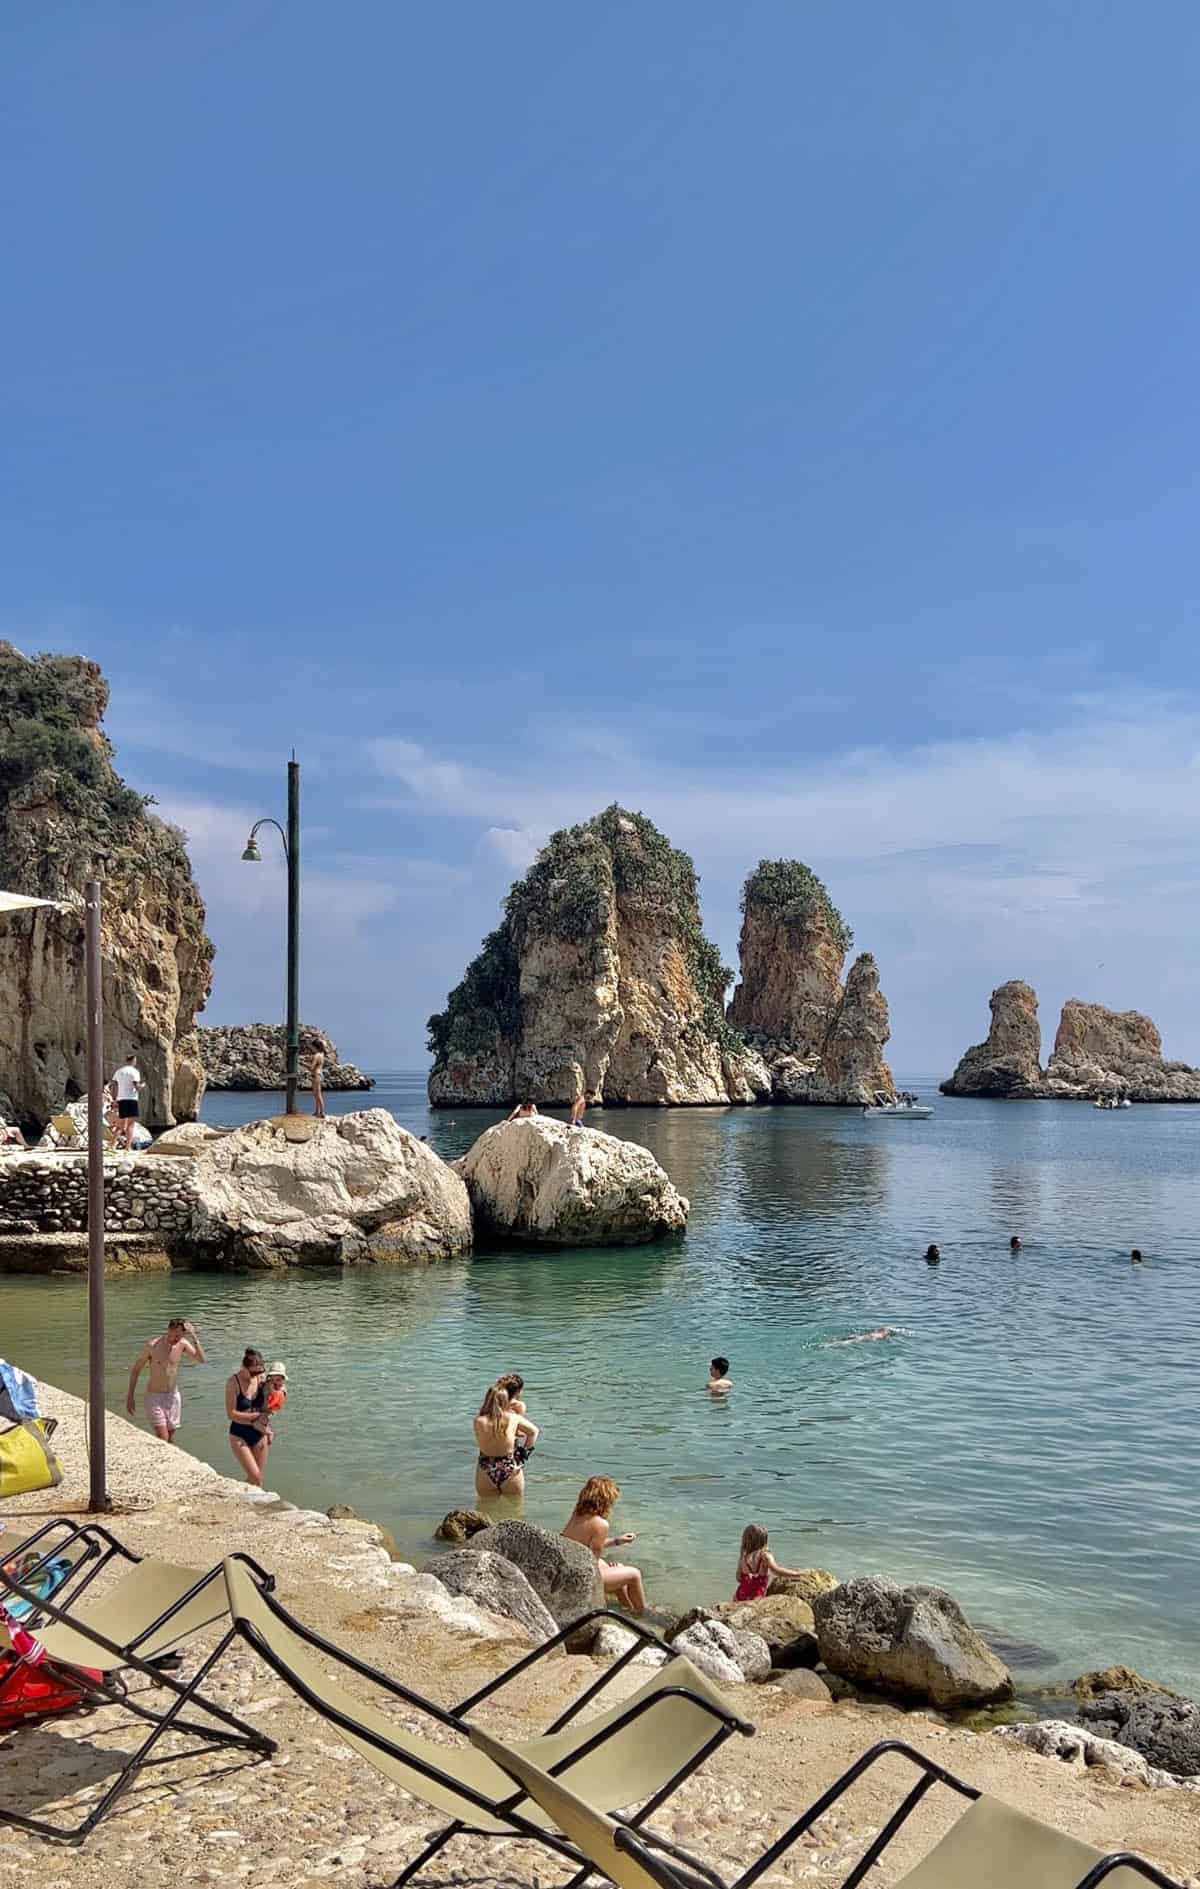 An image of the aquamarine waters and rocky beaches of the Tonnara in Scopello, Sicily